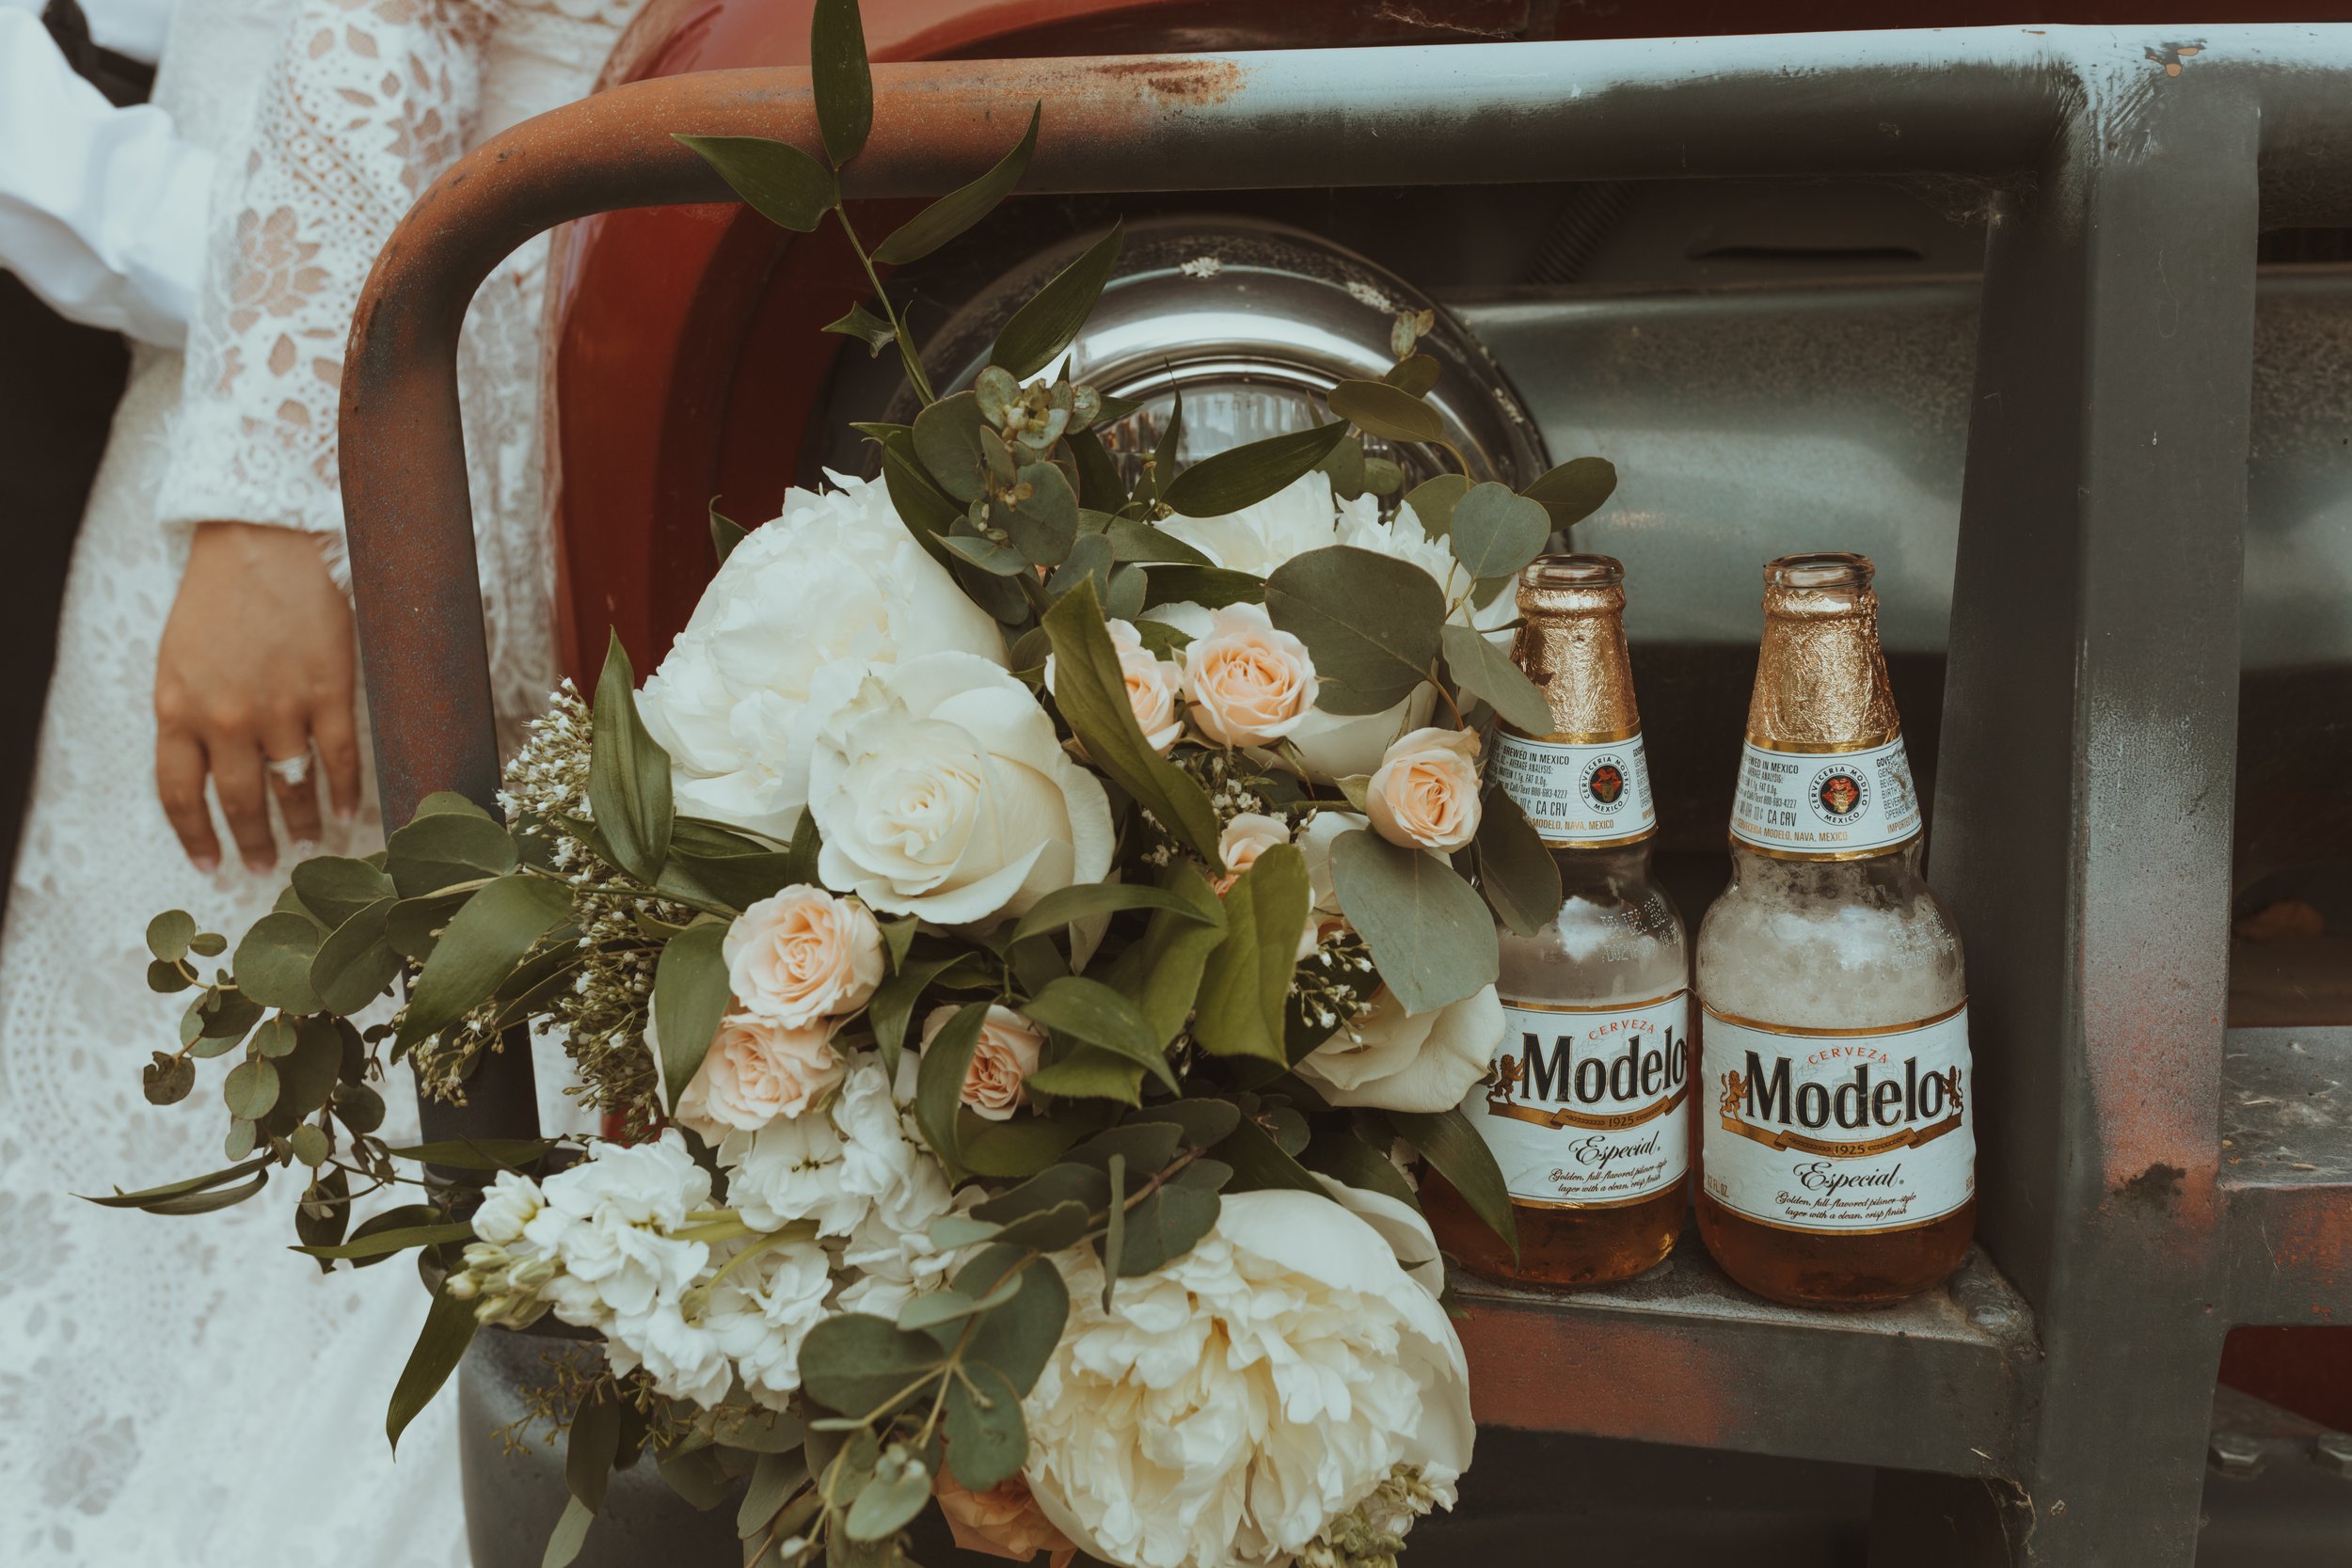 Modelo and Flowers